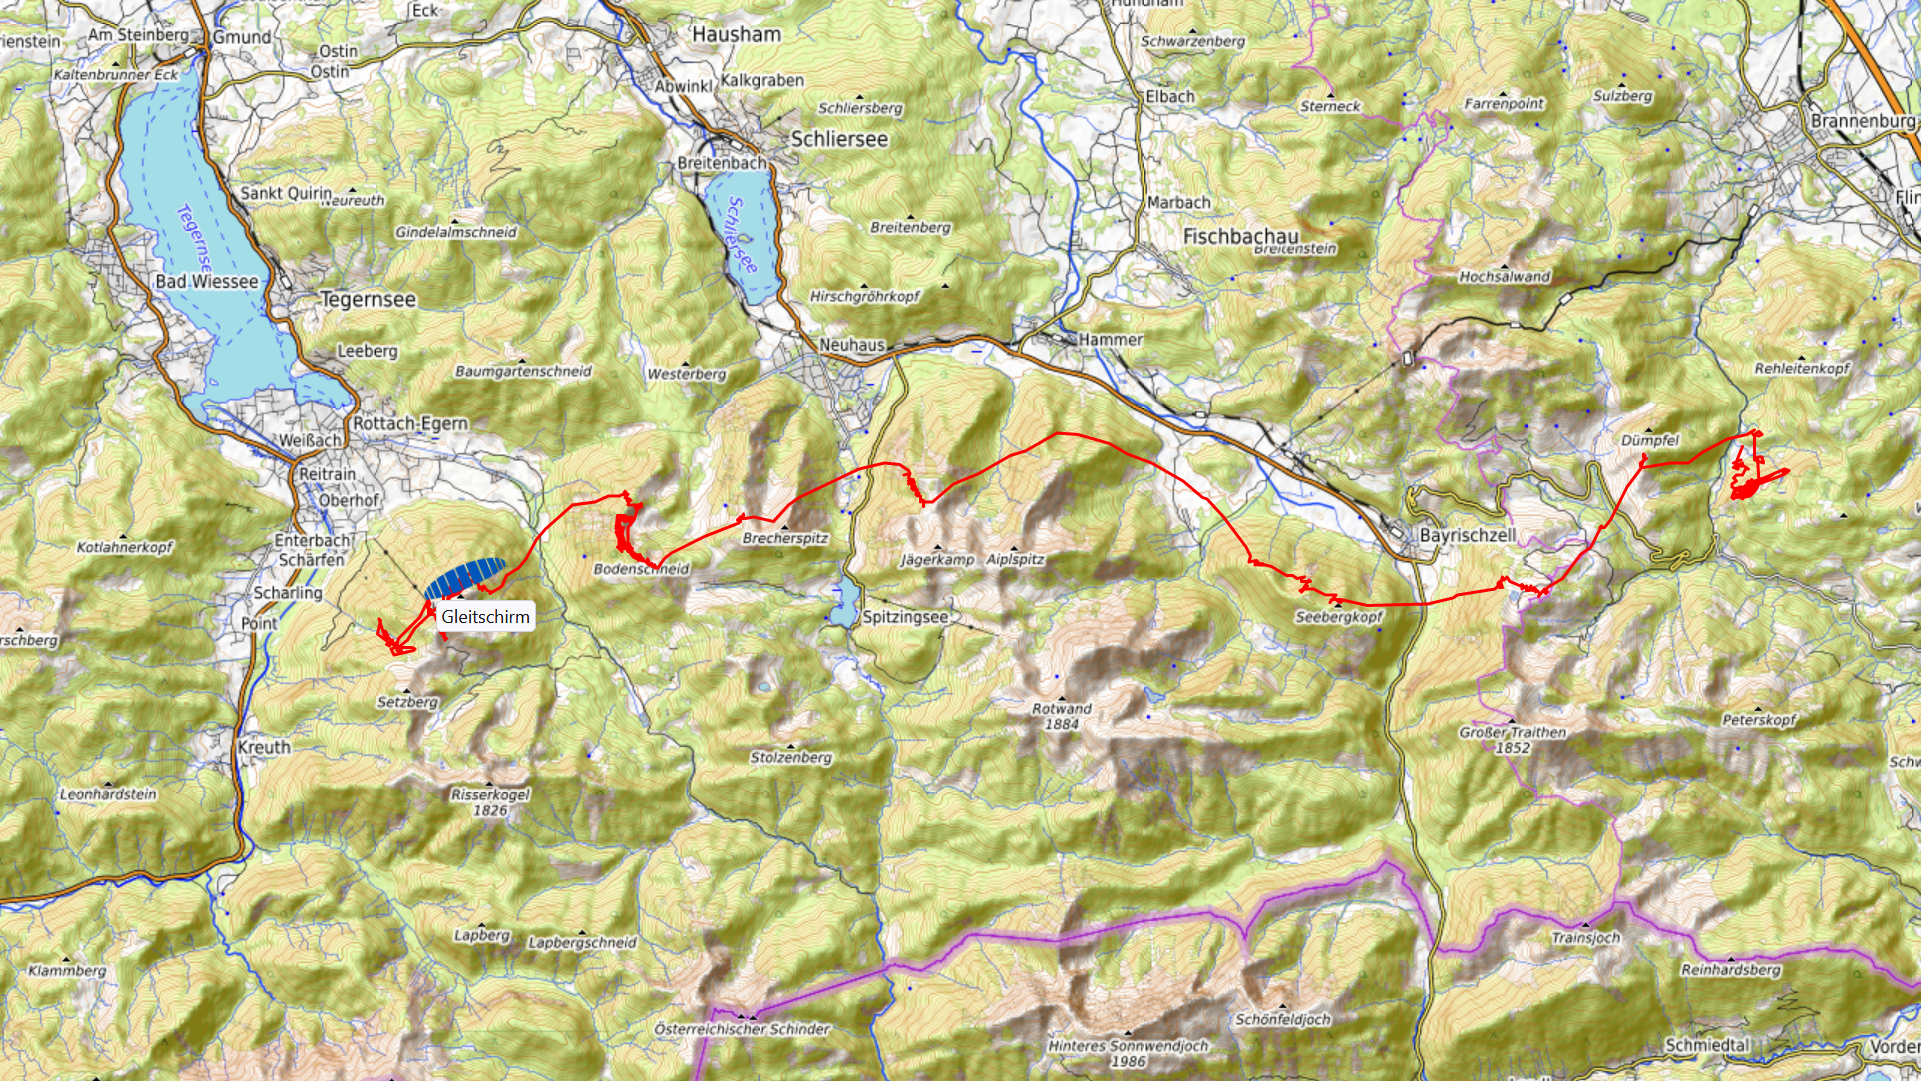 You are currently viewing Paragliding on Mount Wallberg, Germany on 24. April 2021